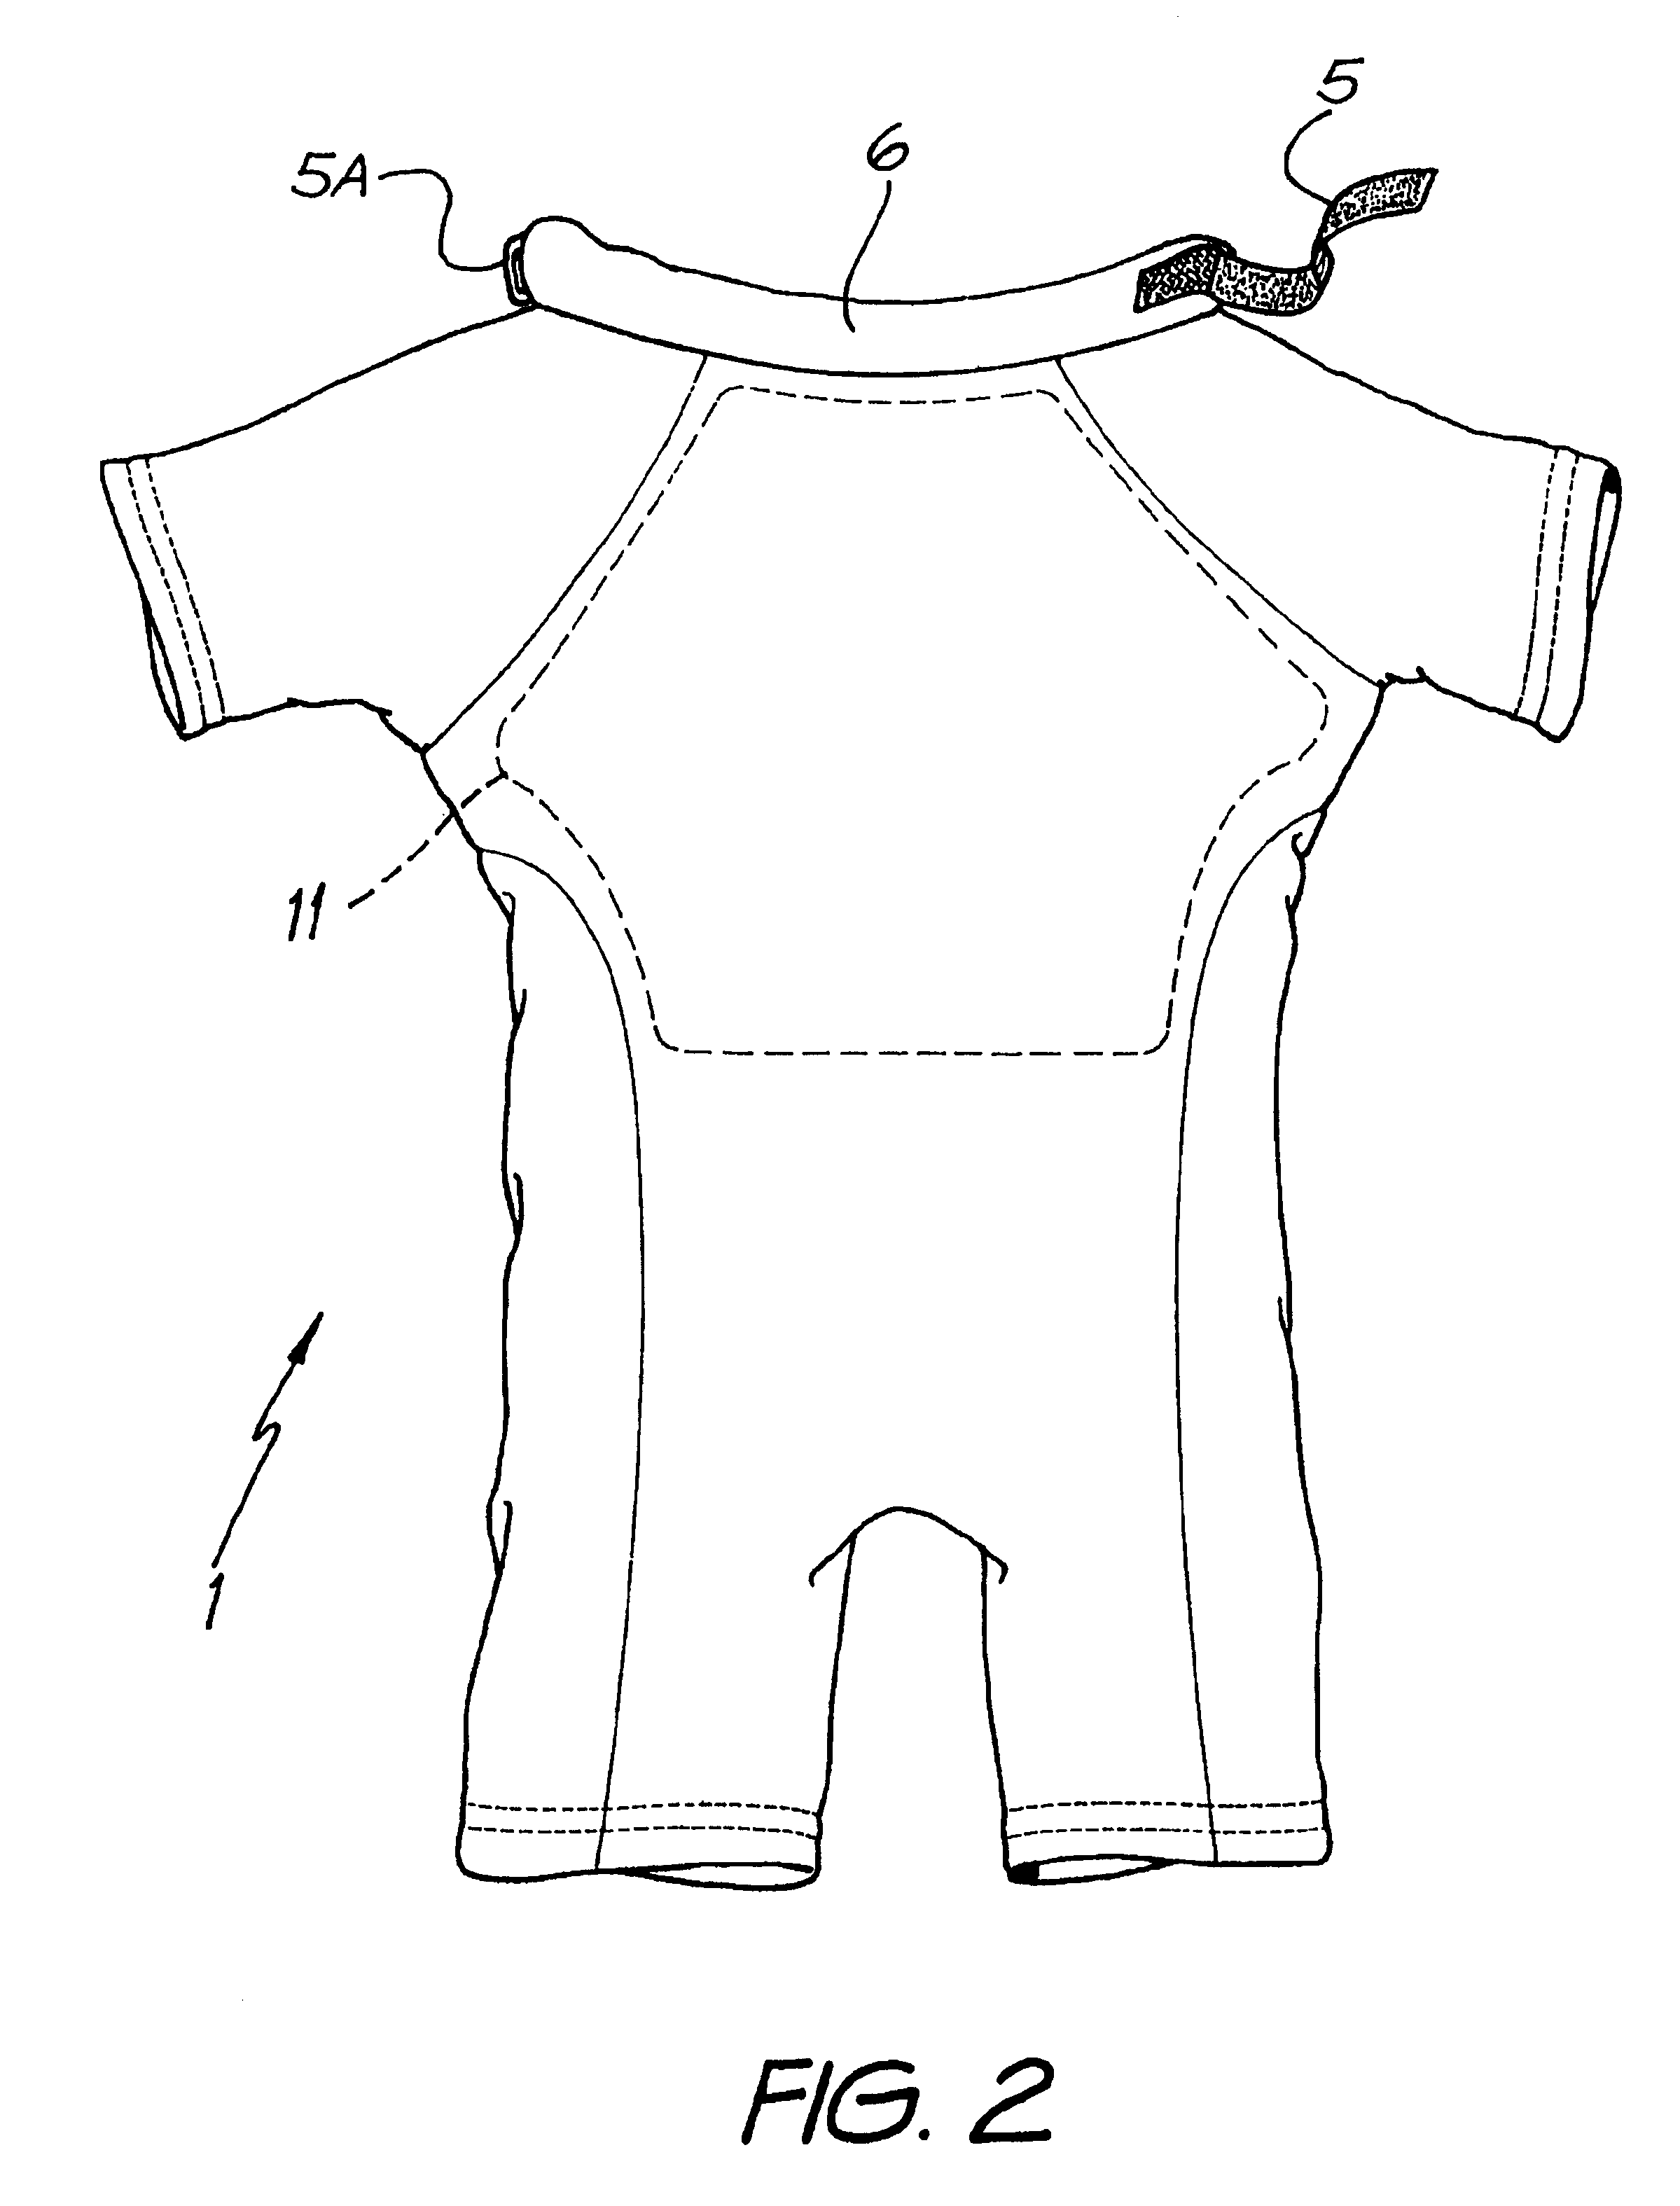 Swimwear with buoyant neck support and body panels